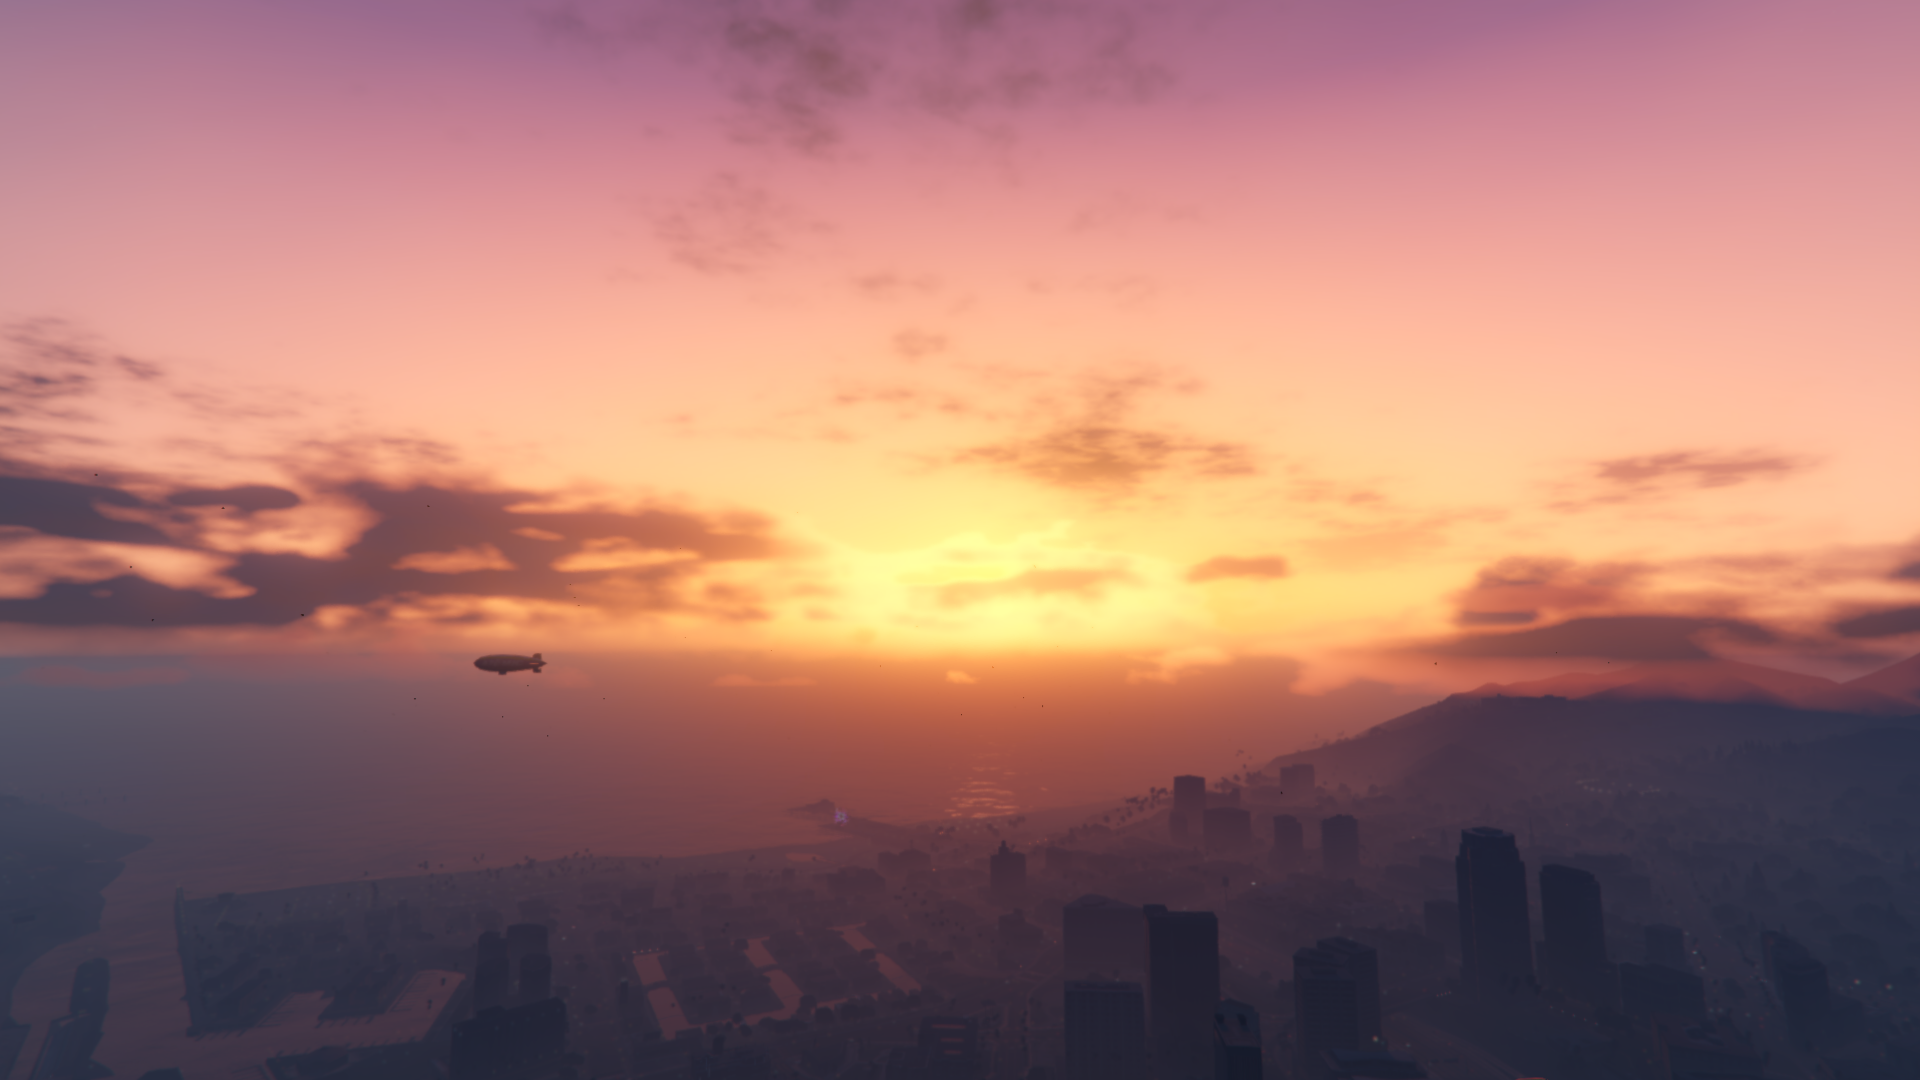 General 1920x1080 Grand Theft Auto V sunset sea city clouds video games video game landscape screen shot PC gaming orange sky sunlight